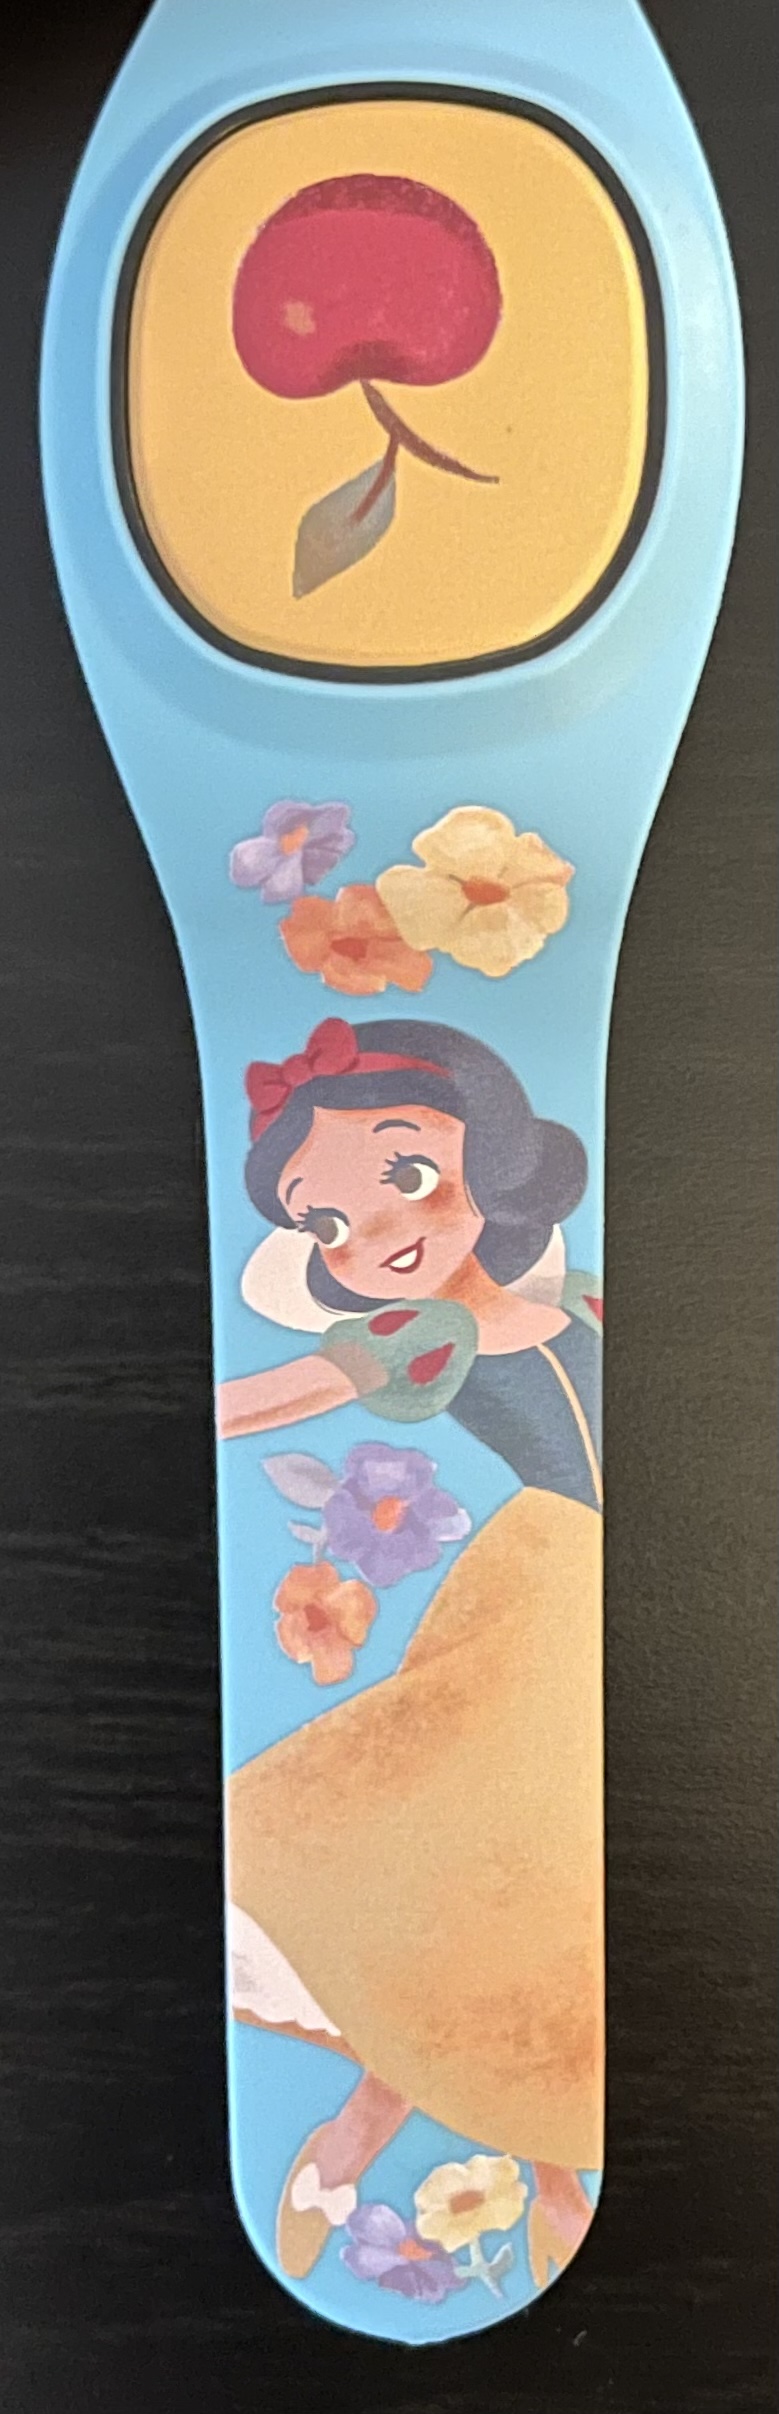 Snow White and the Seven Dwarfs Limited Release MagicBand is now out for purchase